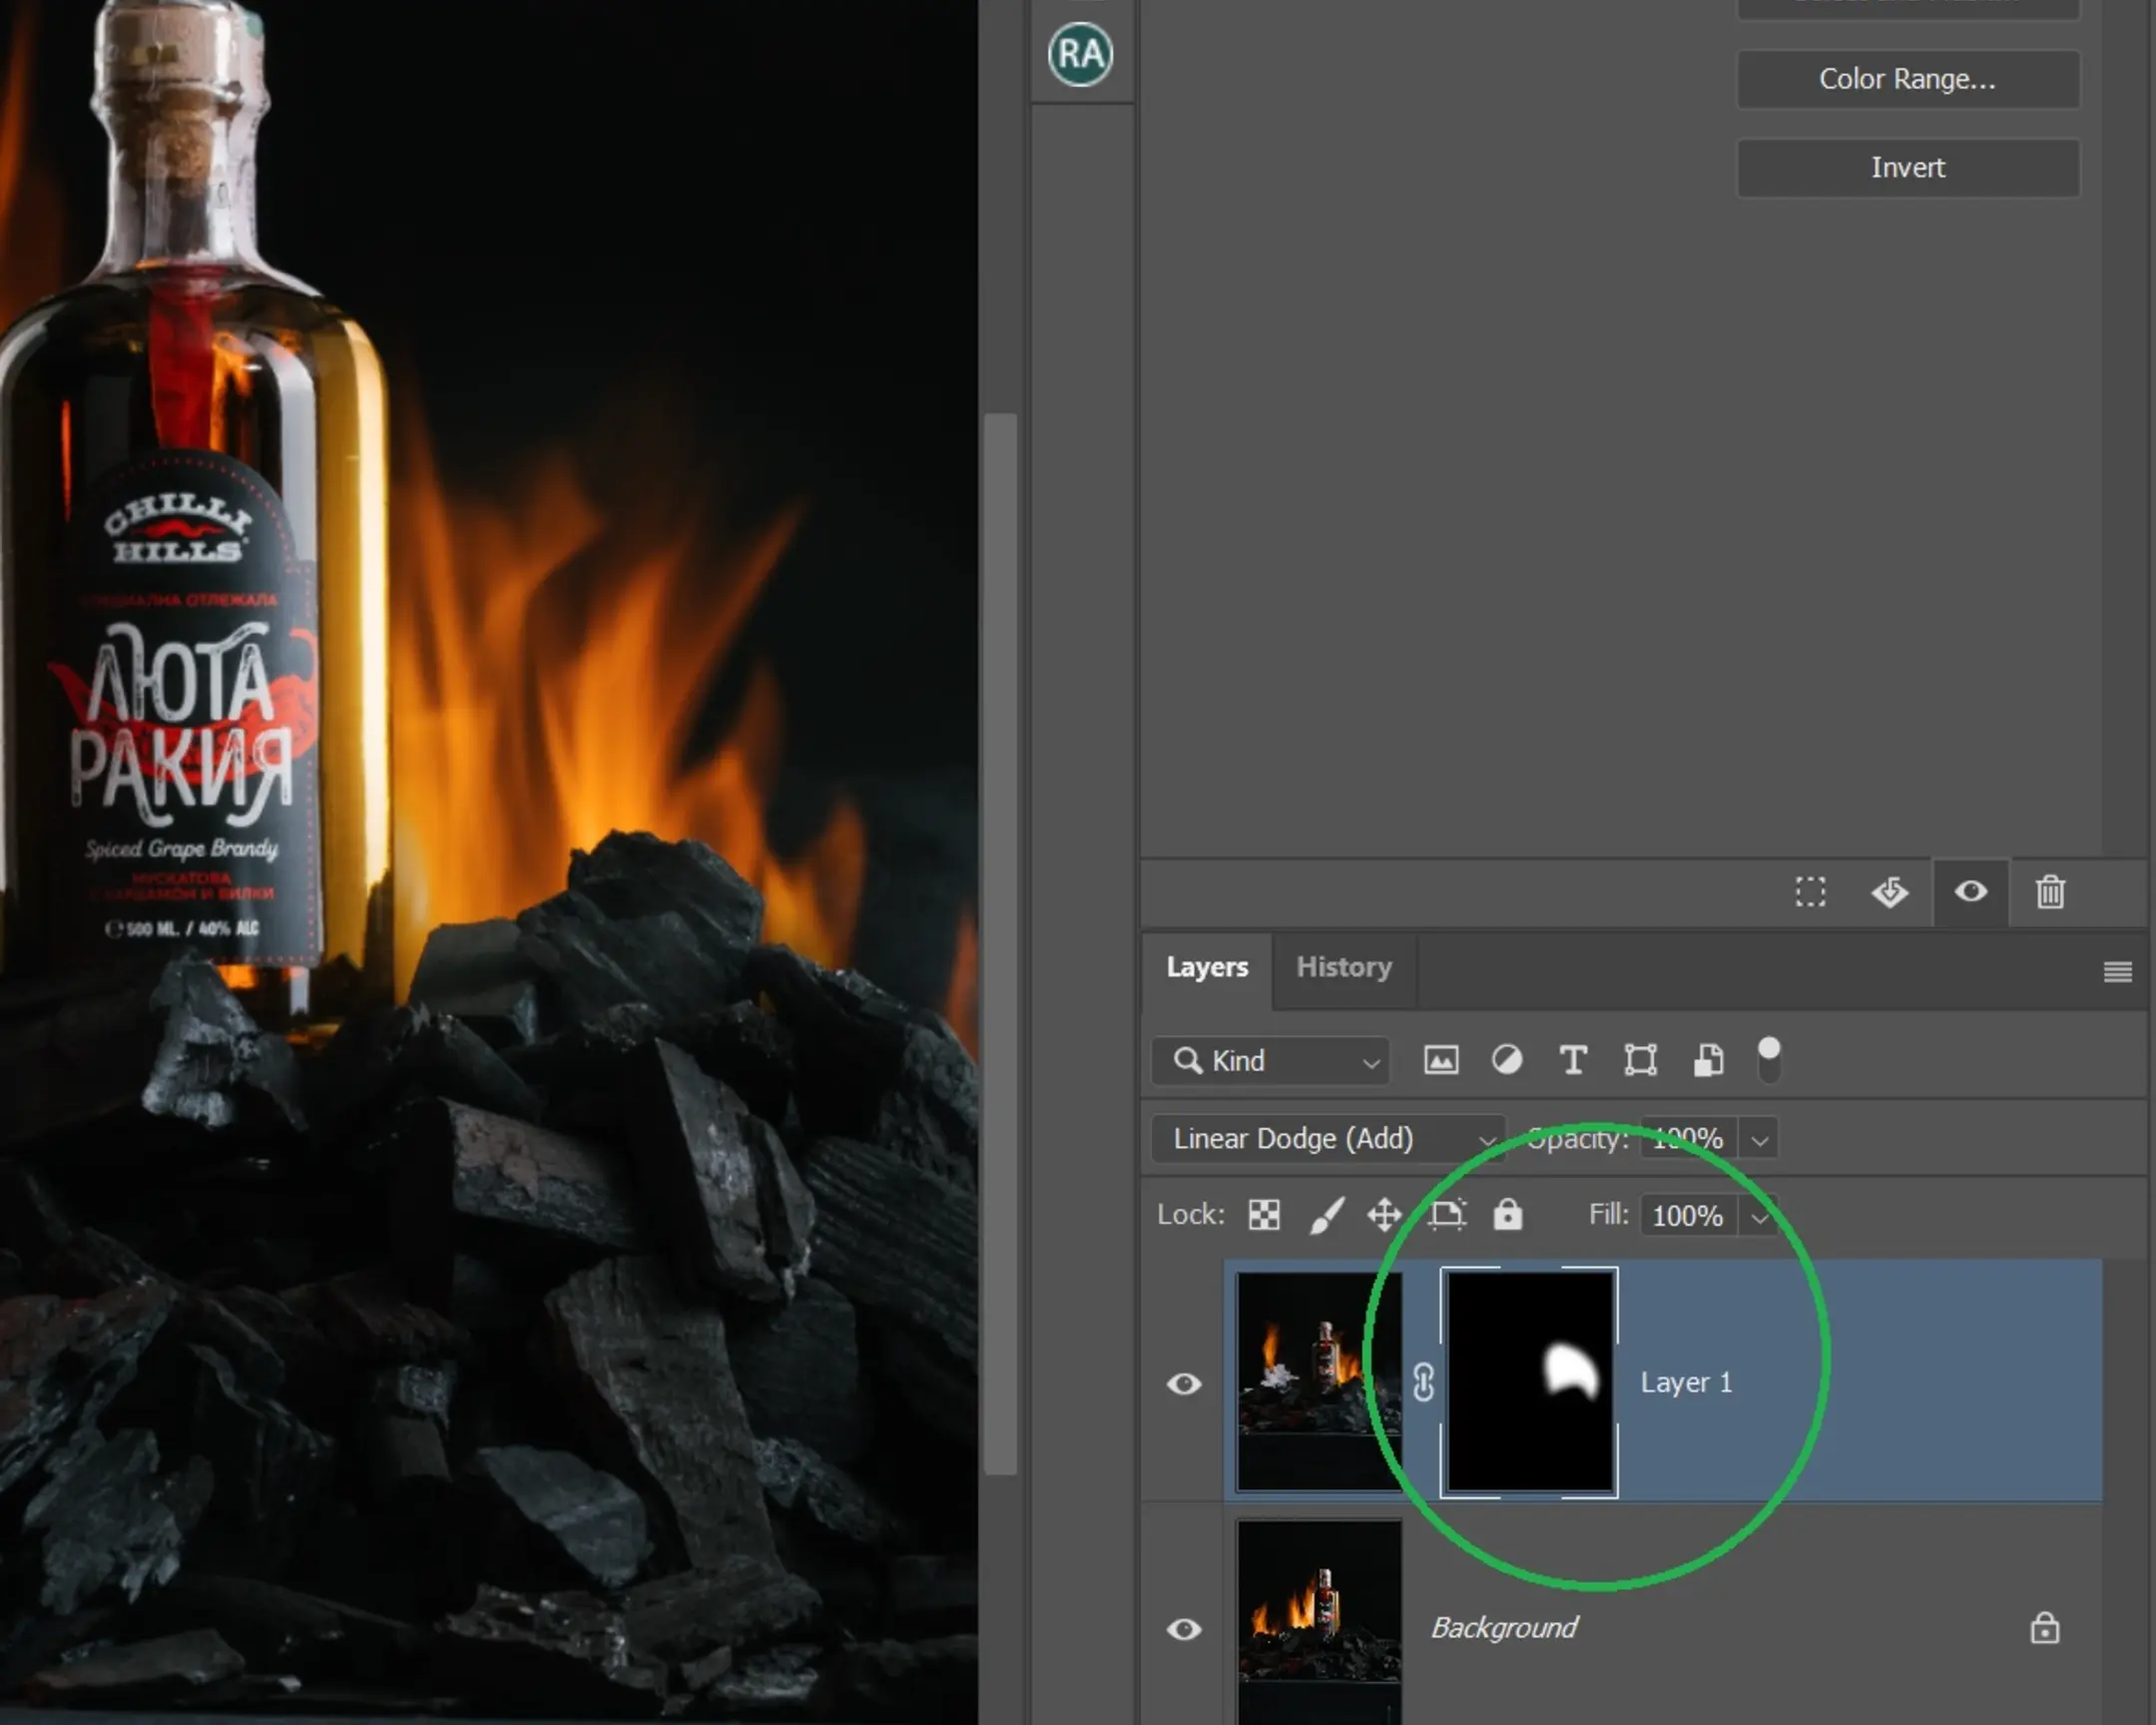 Photoshop - Mask Demonstration. The photo shows layers in Photoshop. On one of the layers, there is a mask, it is painted in white for the manifestation of fire. To attract the attention of the viewer - the mask is circled in green.